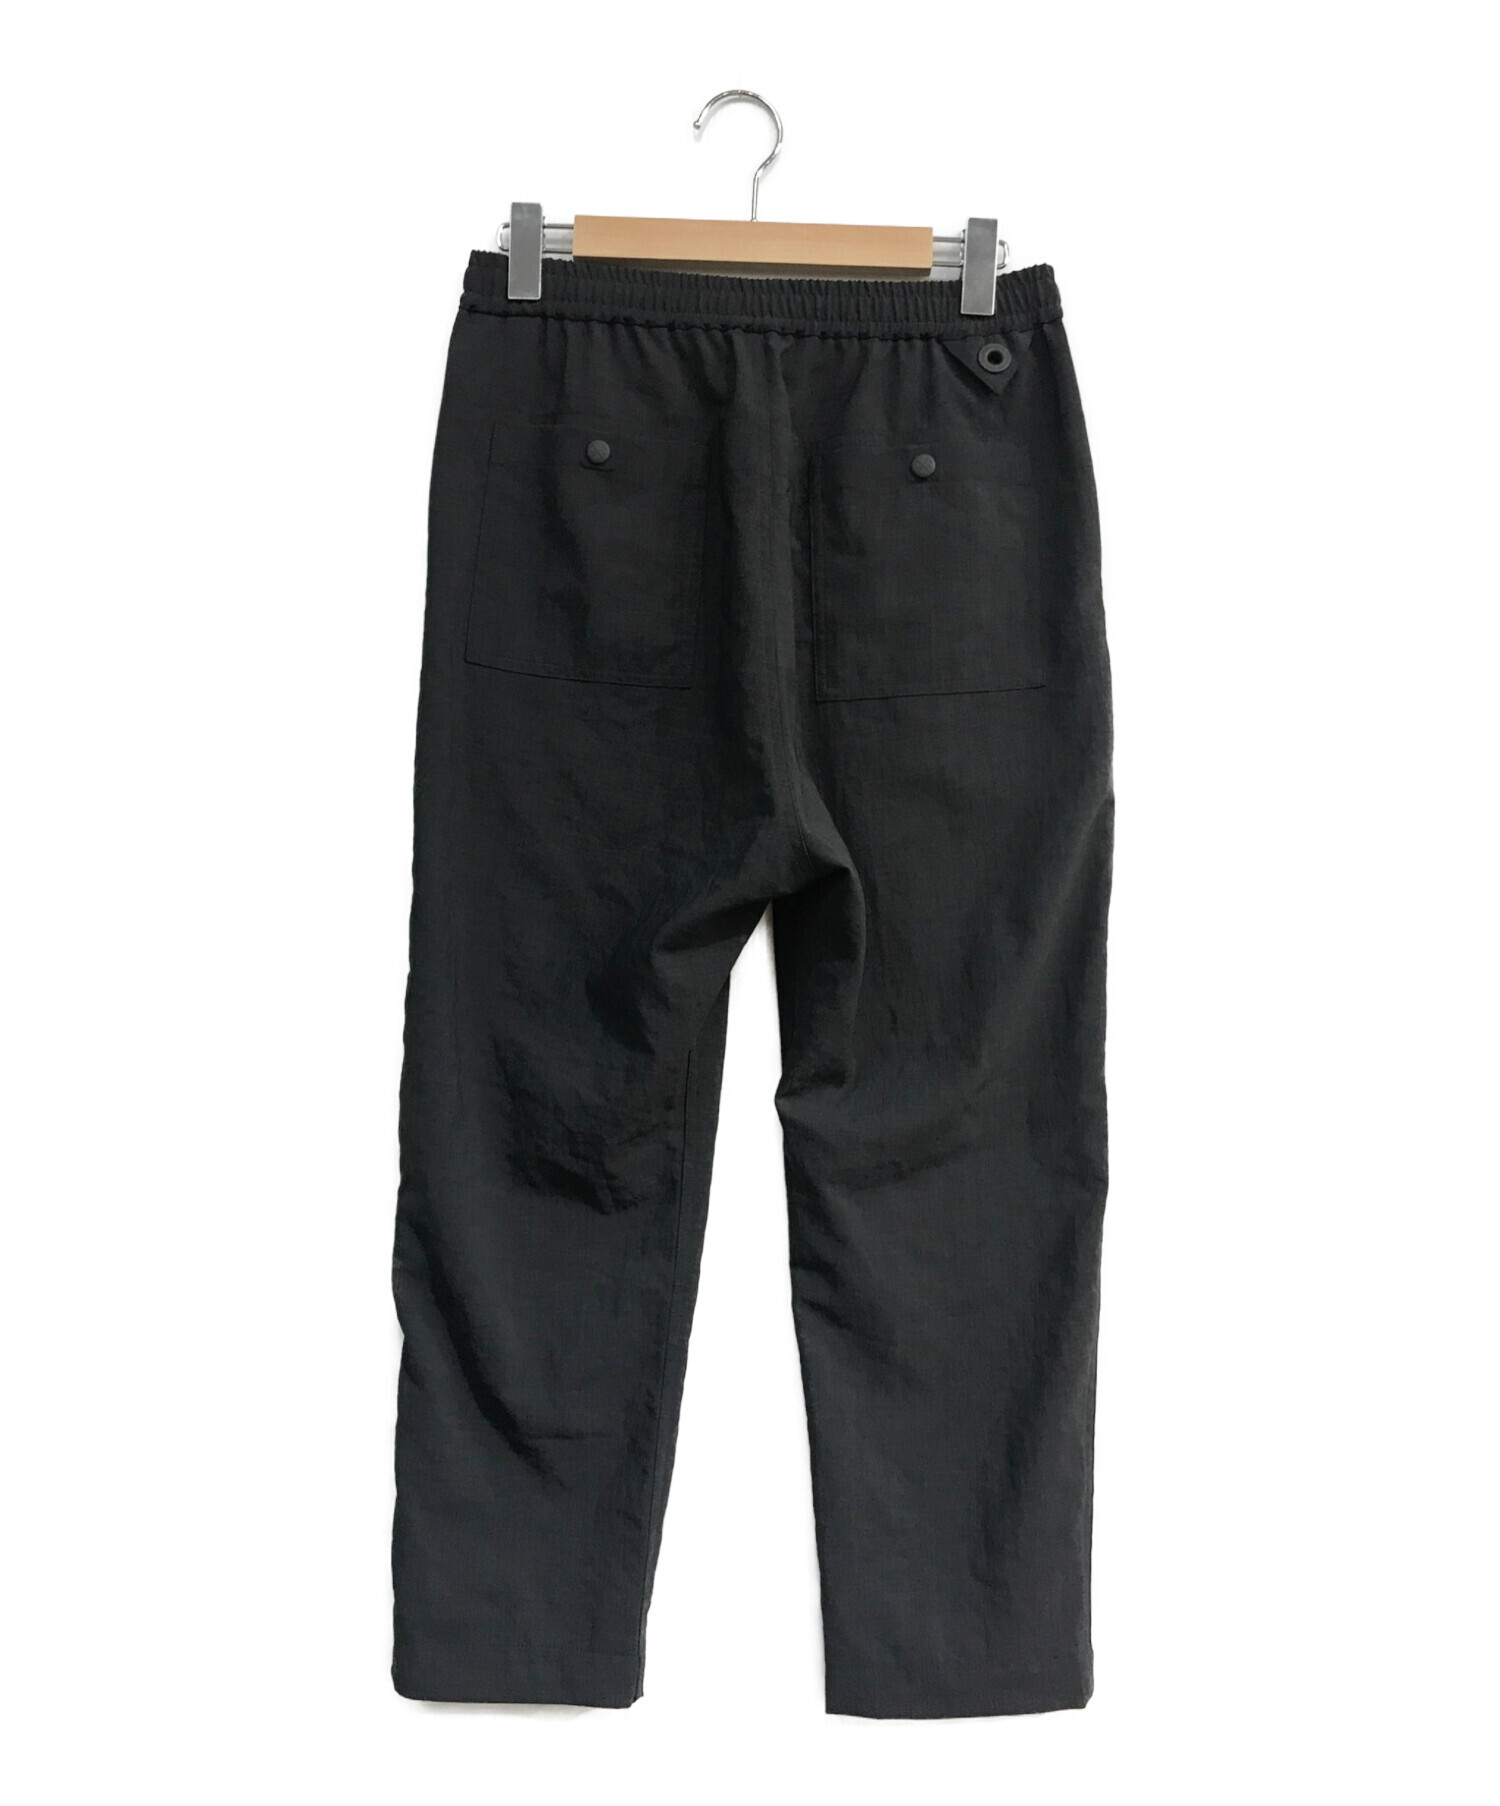 WHITE MOUNTAINEERING (ホワイトマウンテ二アニング) REPOSE WEAR STRETCHED PANTS　RW2271401  グレー